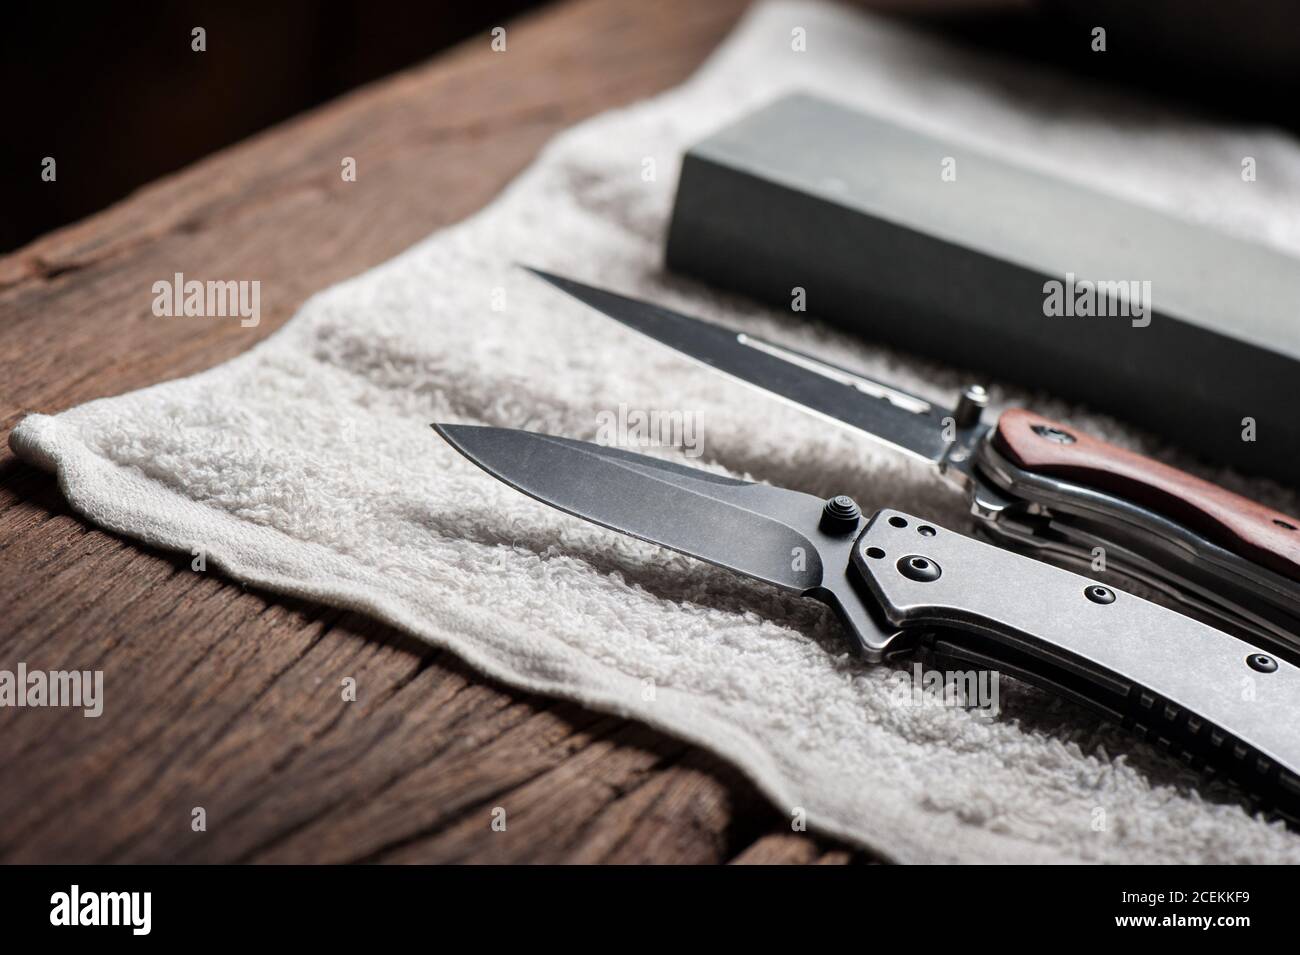 Premium Photo  The man using whetstone to sharpening his pocket knife  pocket knife care and maintenance concept